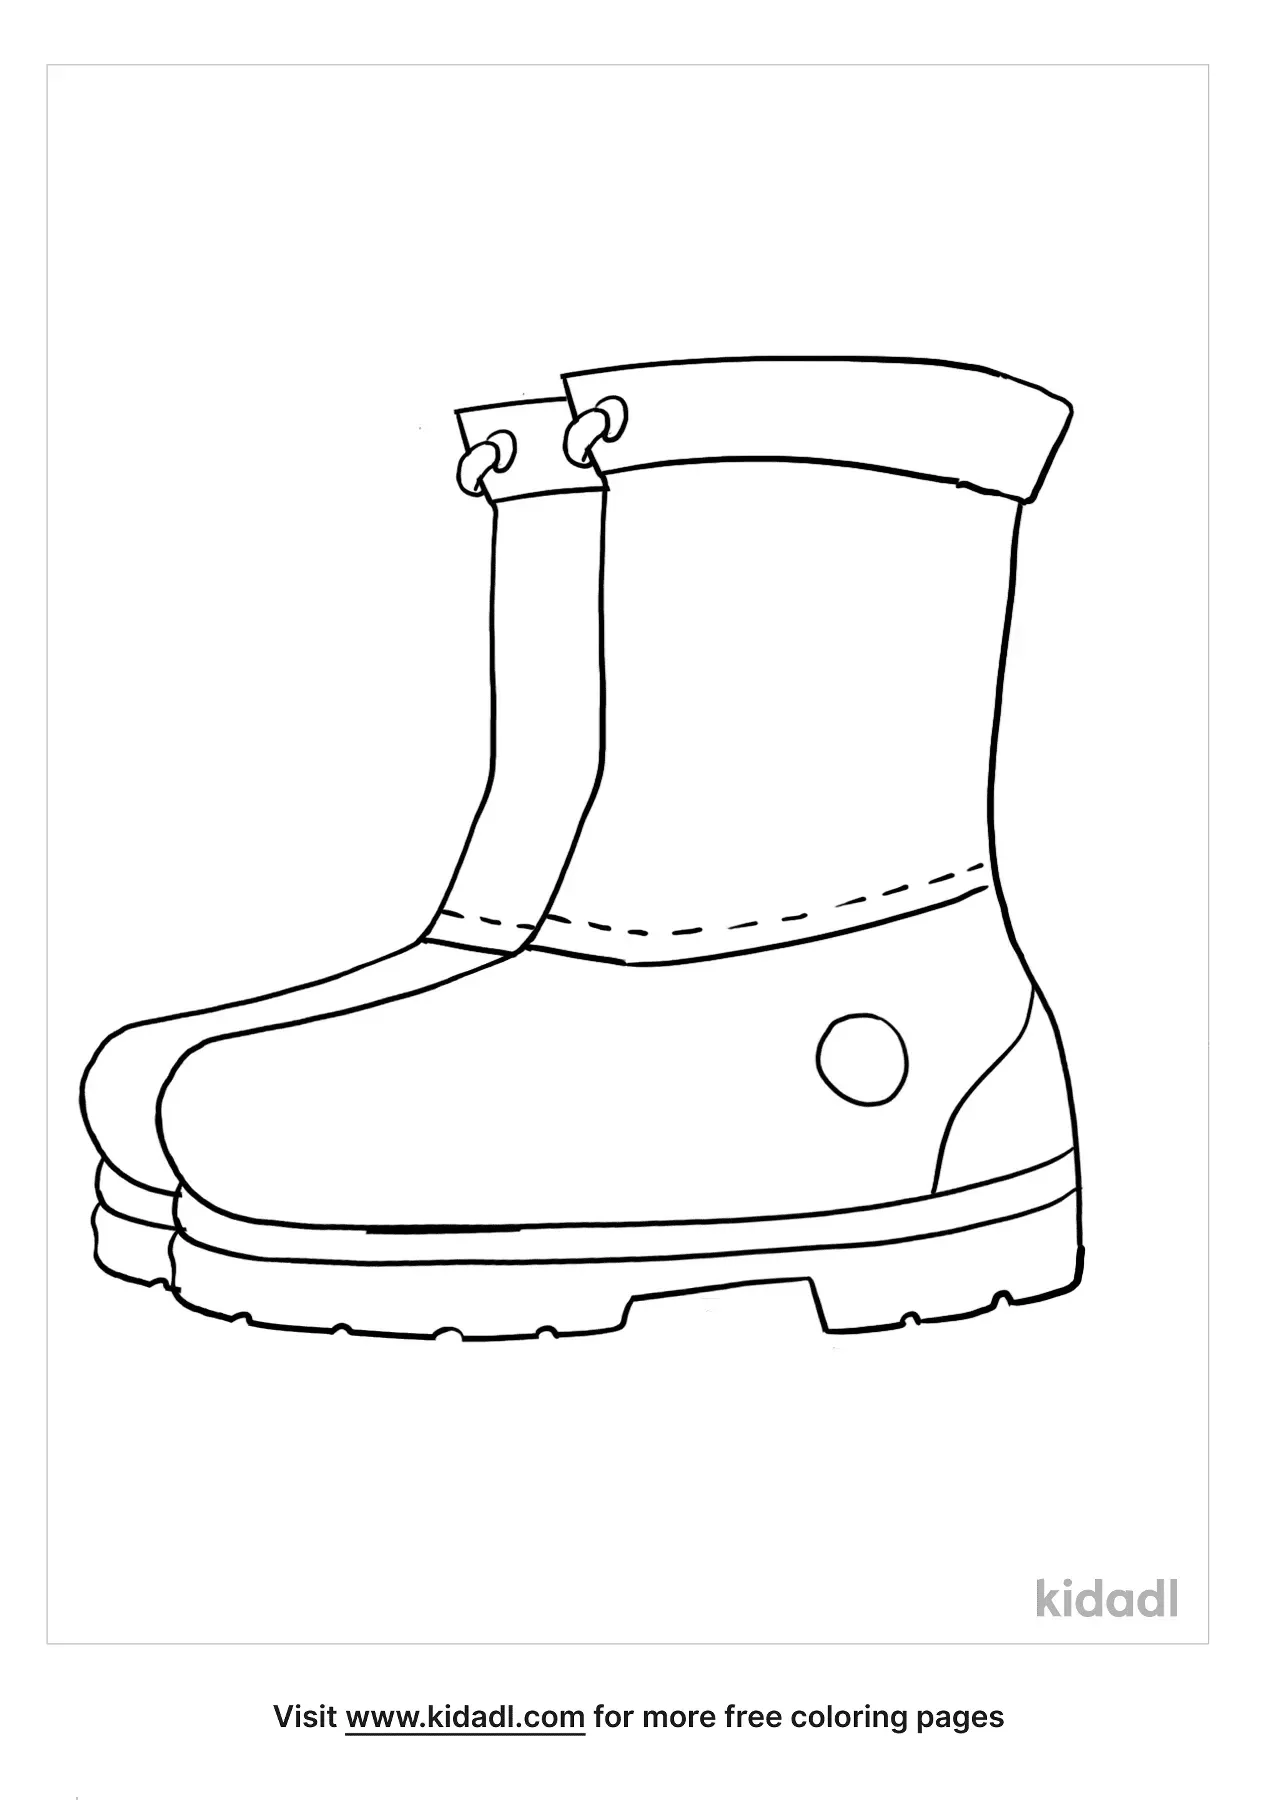 Free Boot Coloring Page | Coloring Page Printables | Kidadl